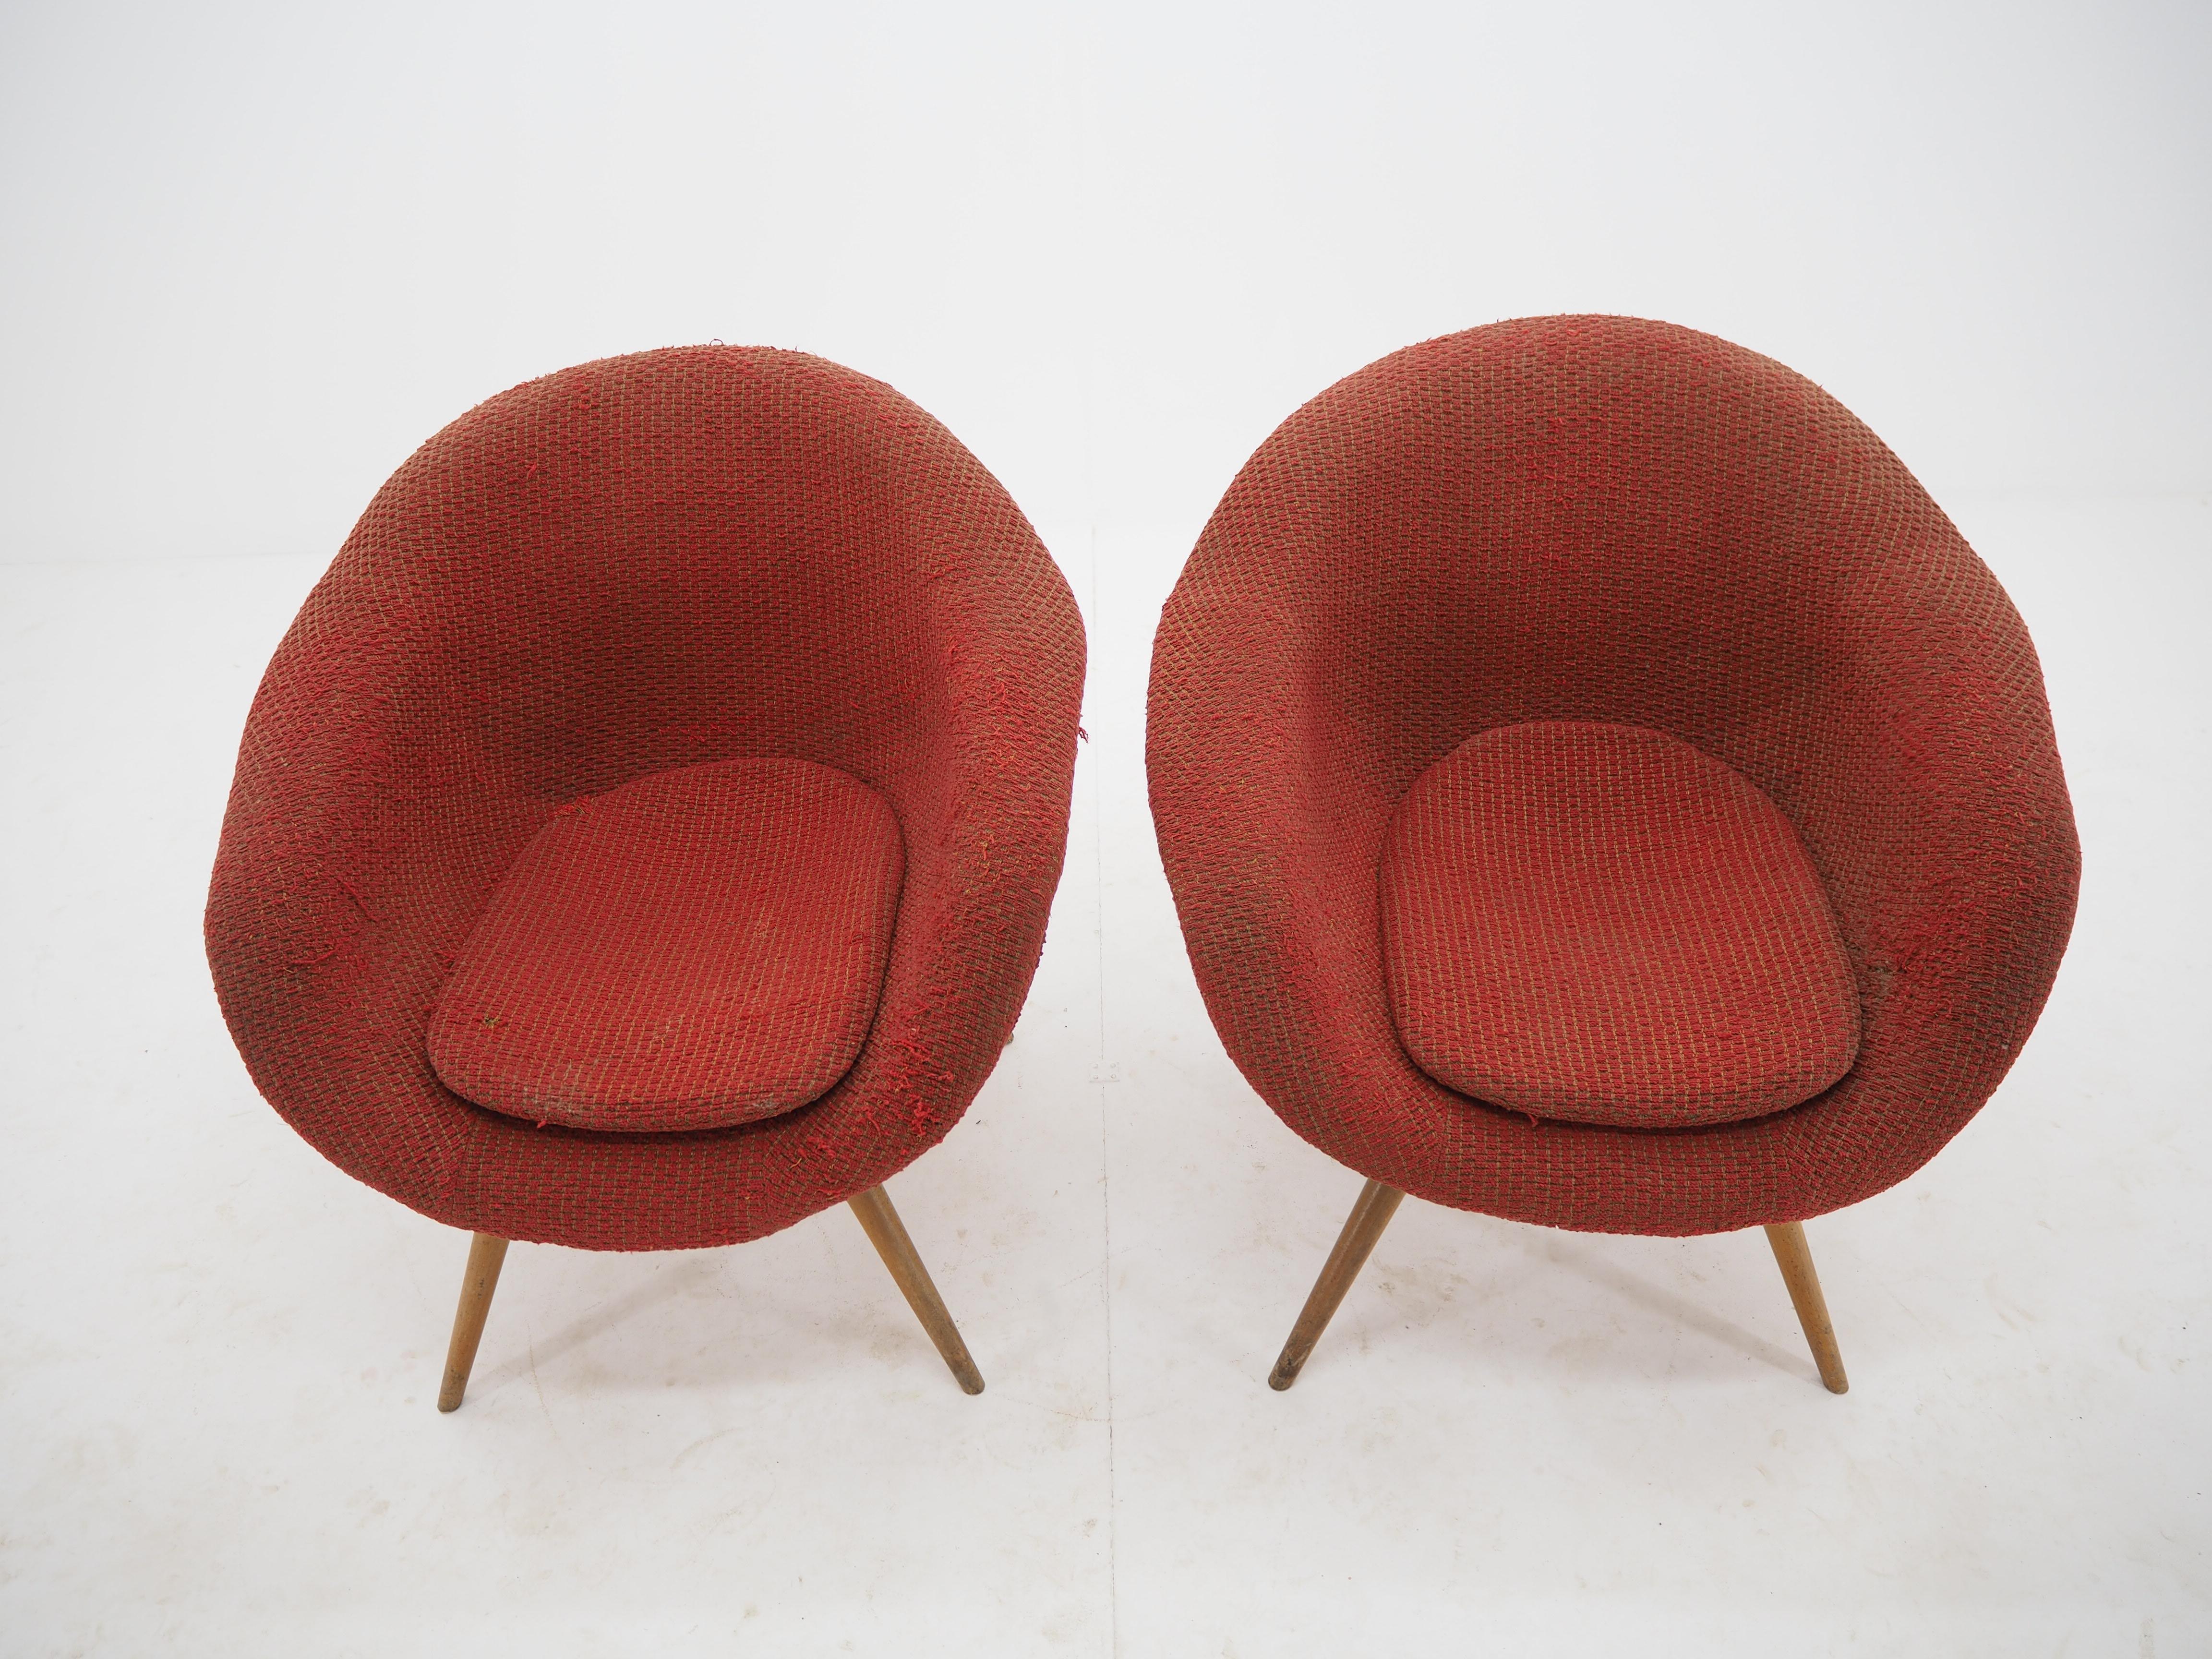 Late 20th Century Pair of Lounge Chairs by Miroslav Navratil, 1960s